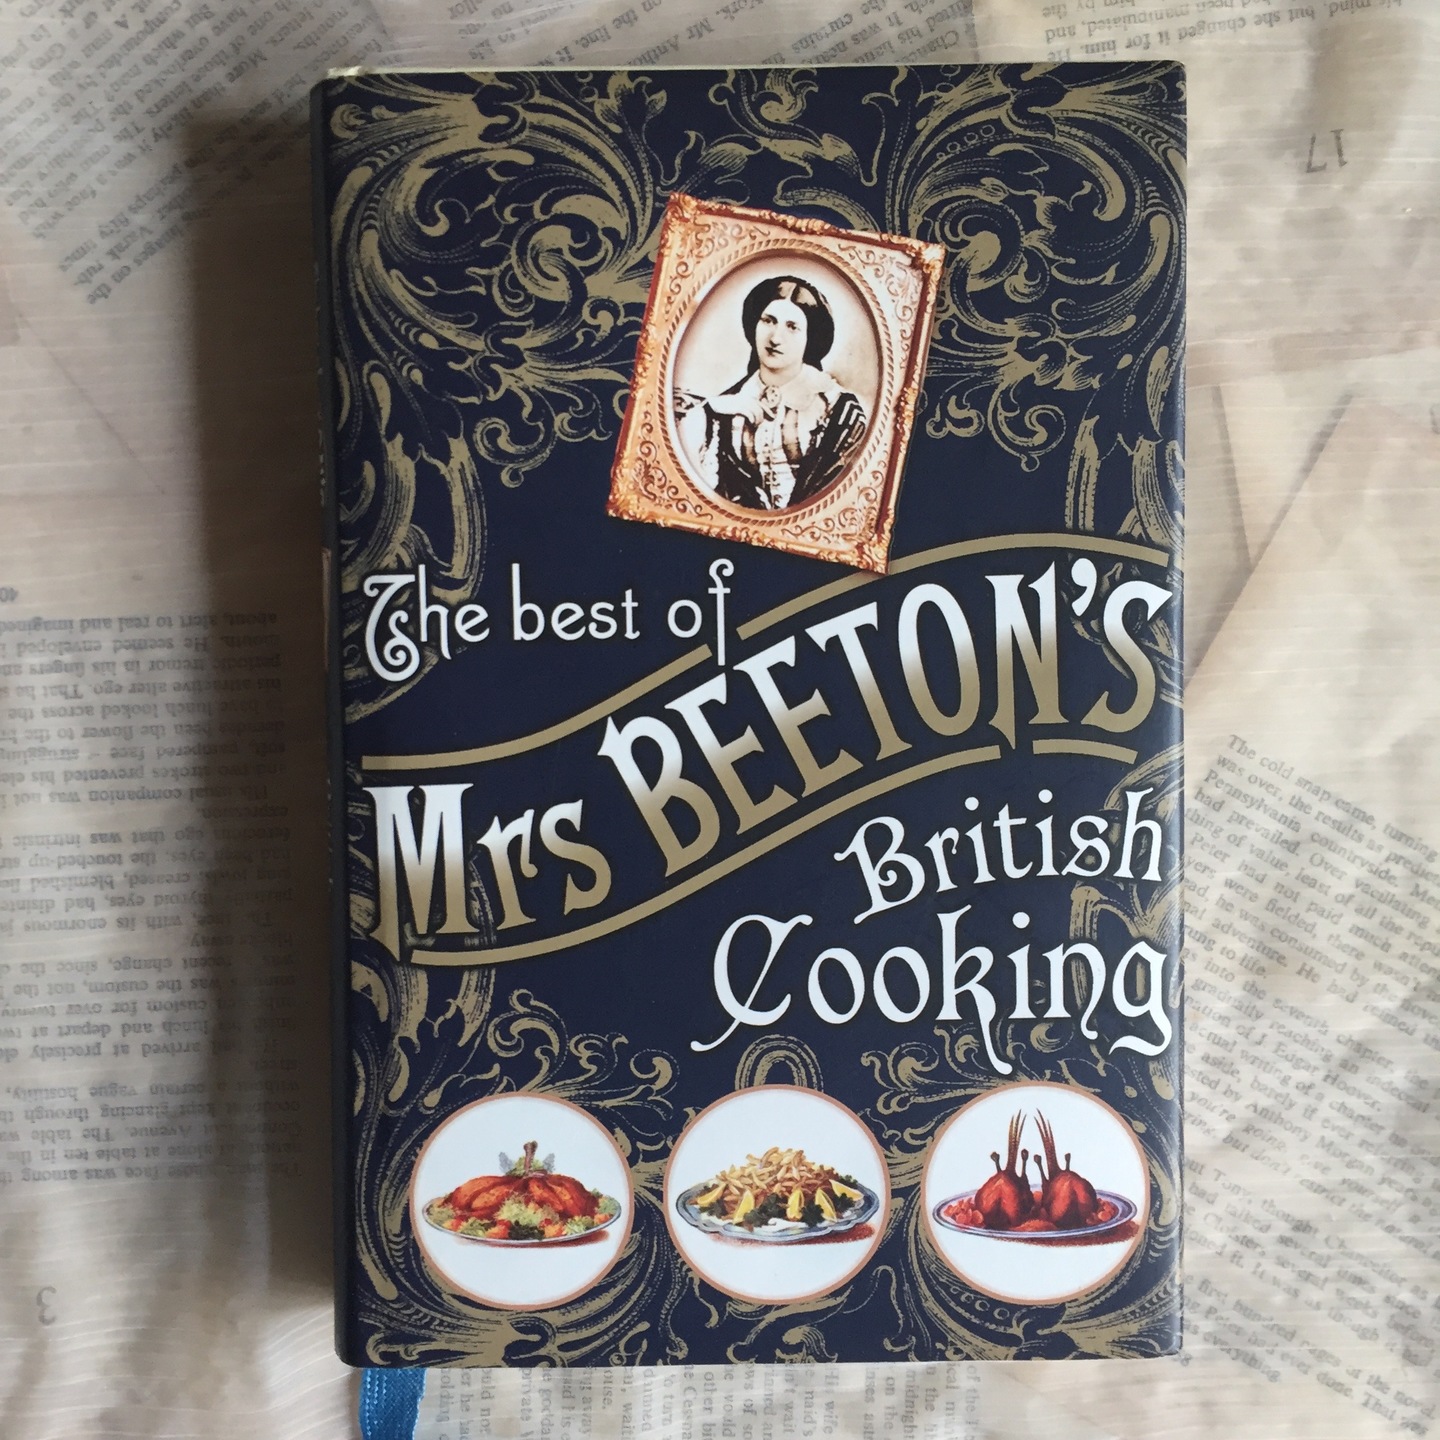 The Best of Mrs Beetons British Cooking by Marks & Spencer Hardcover